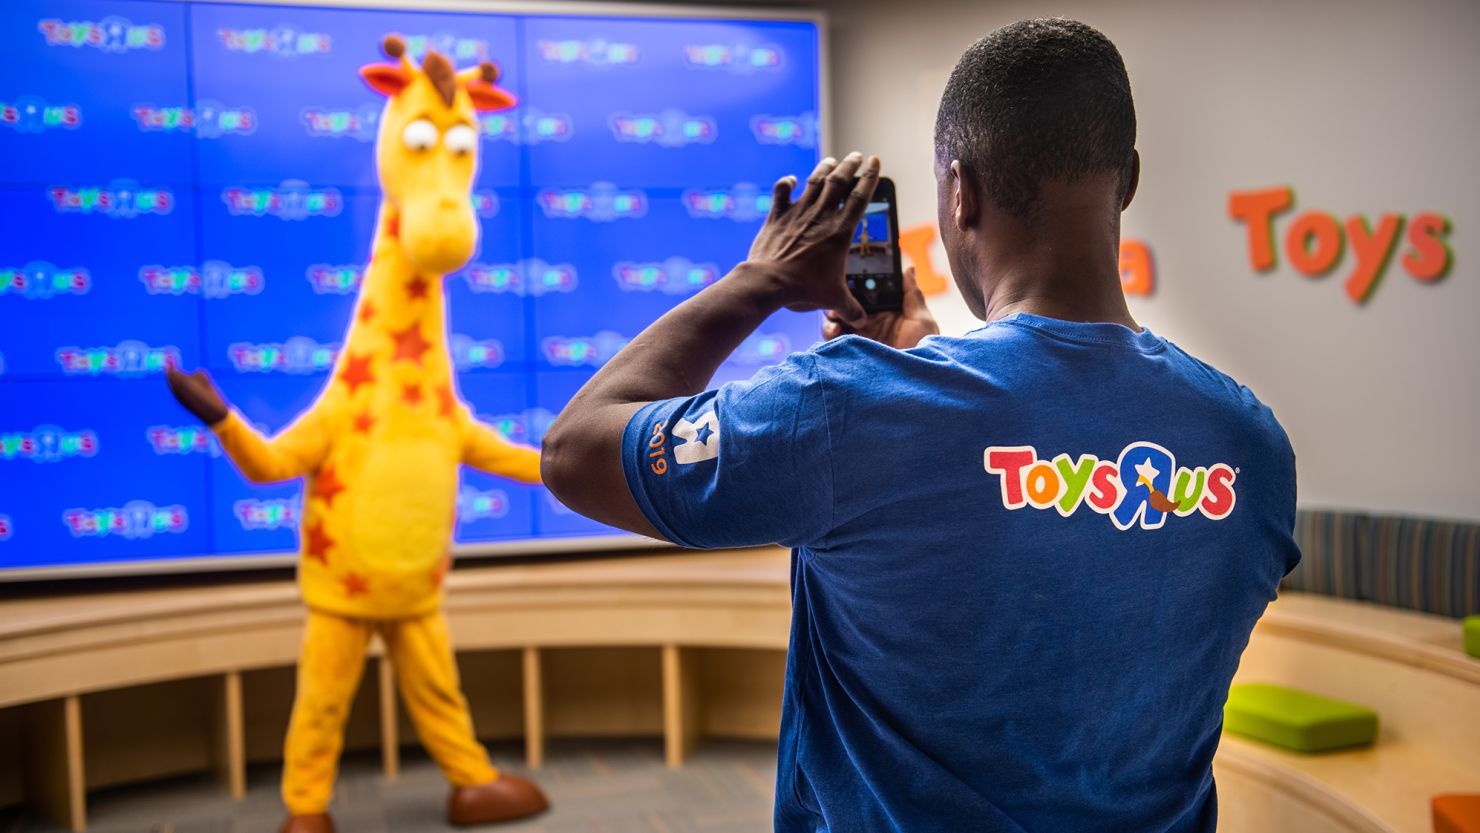 Toys 'R' US to open stores across US, including at airports and